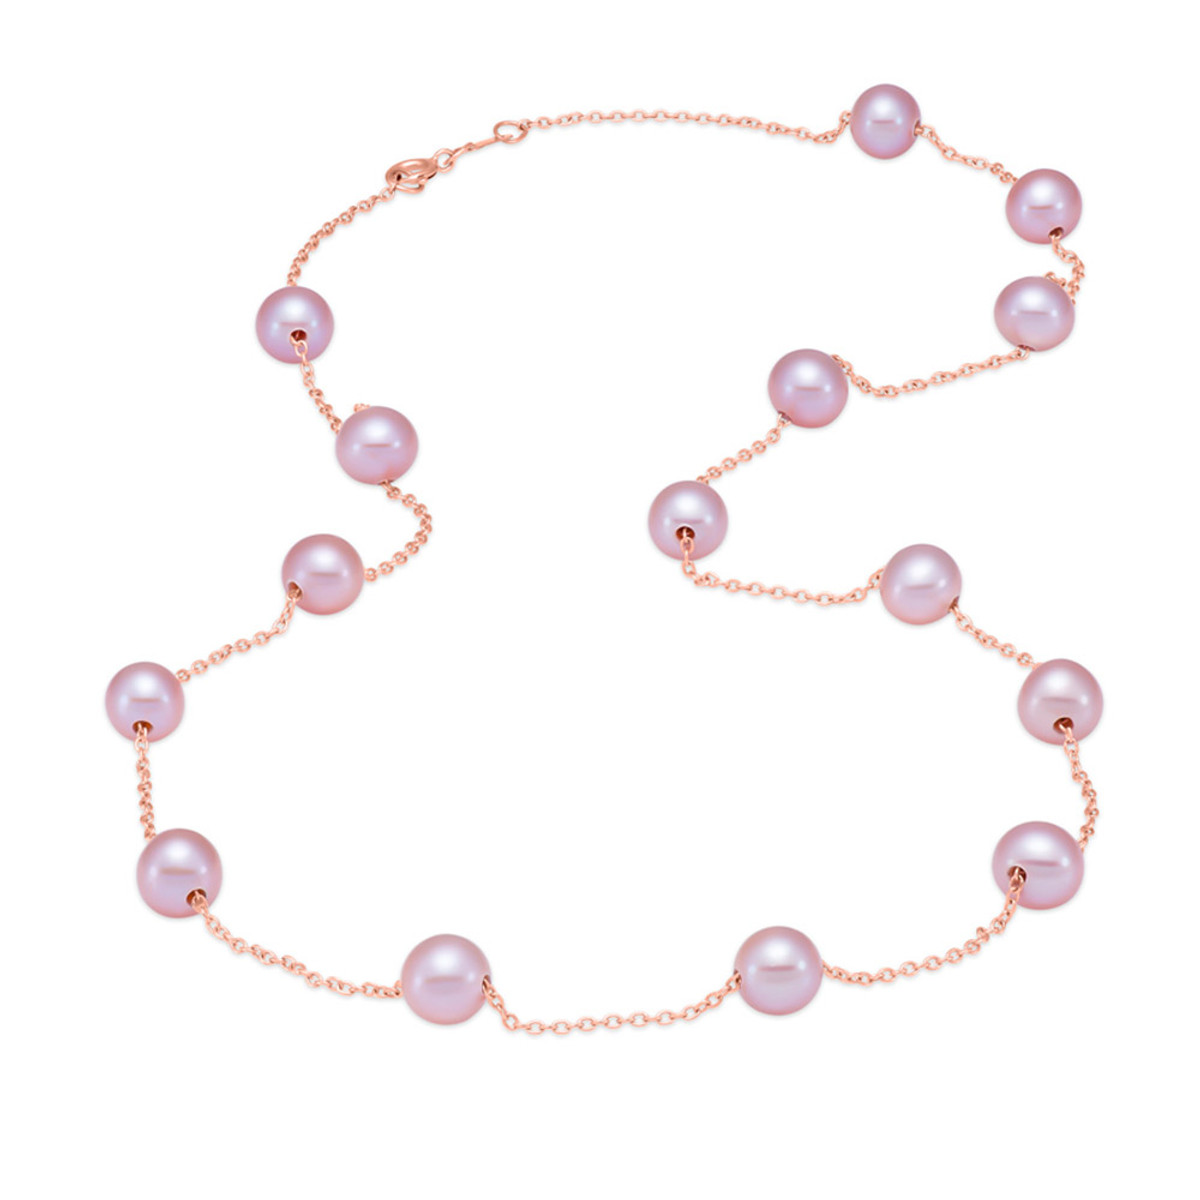 Hyde Park 14K Rose Gold Pearl Necklace. 5.5-6MM.-25828 Product Image